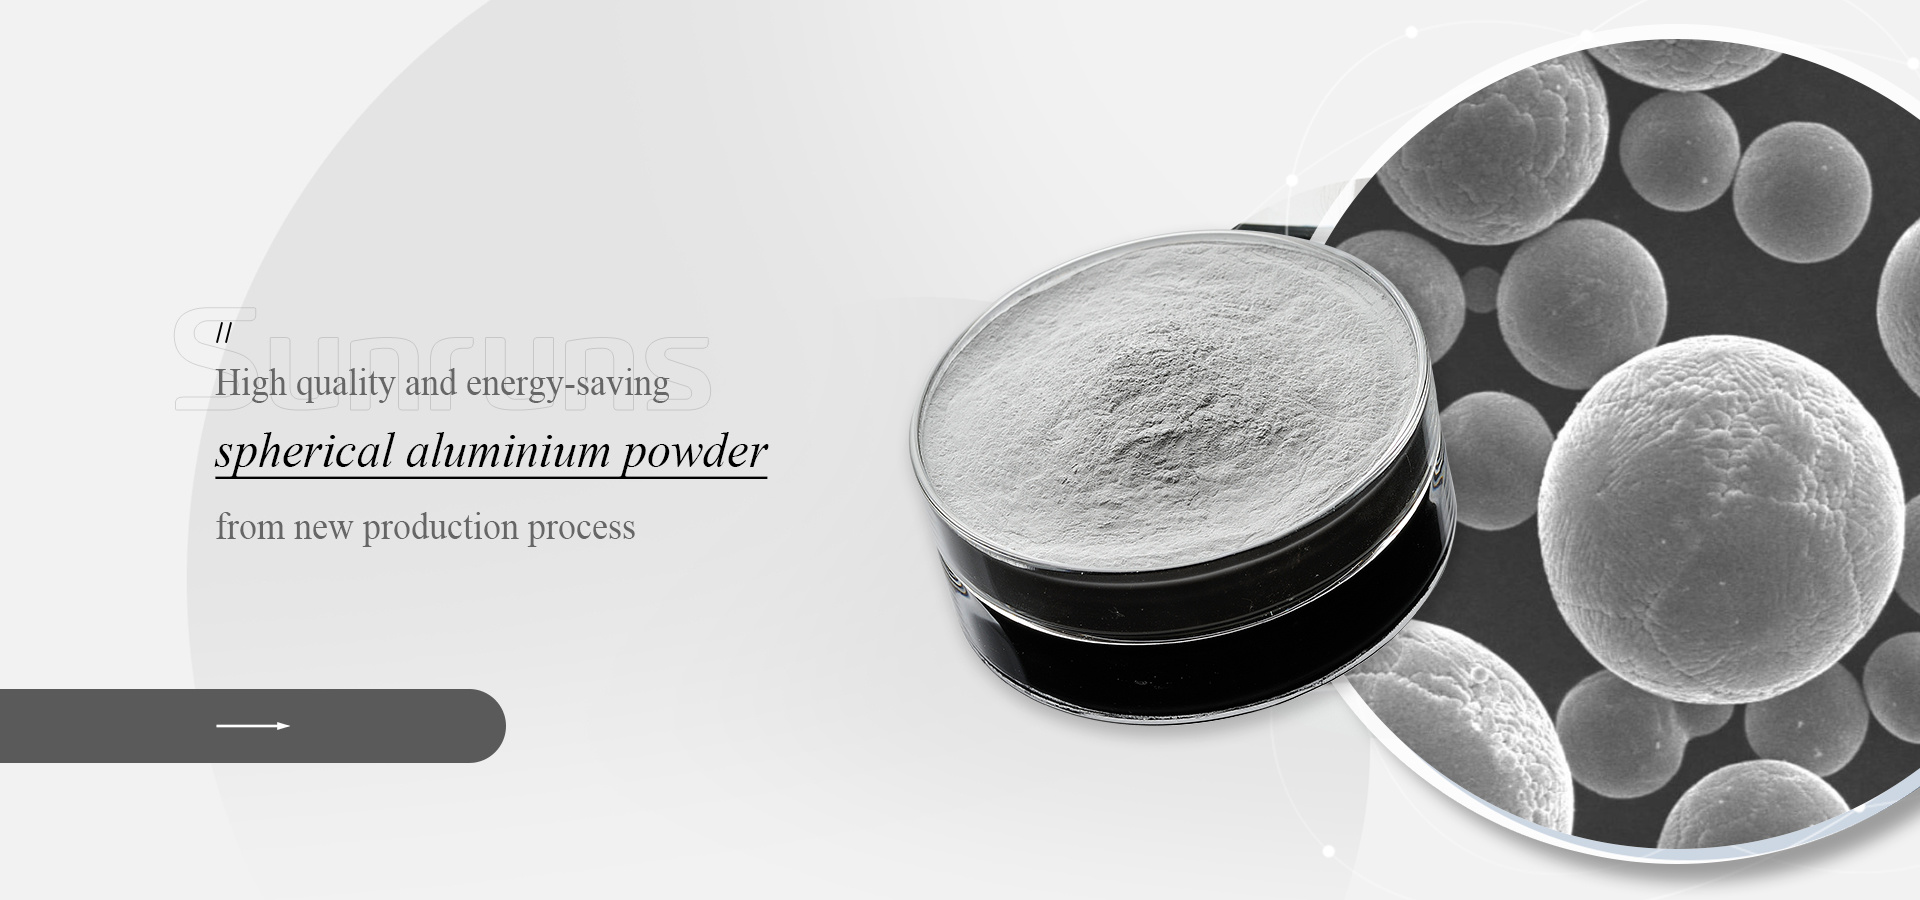 High quality and energy-saving spherical aluminium powder from new production process